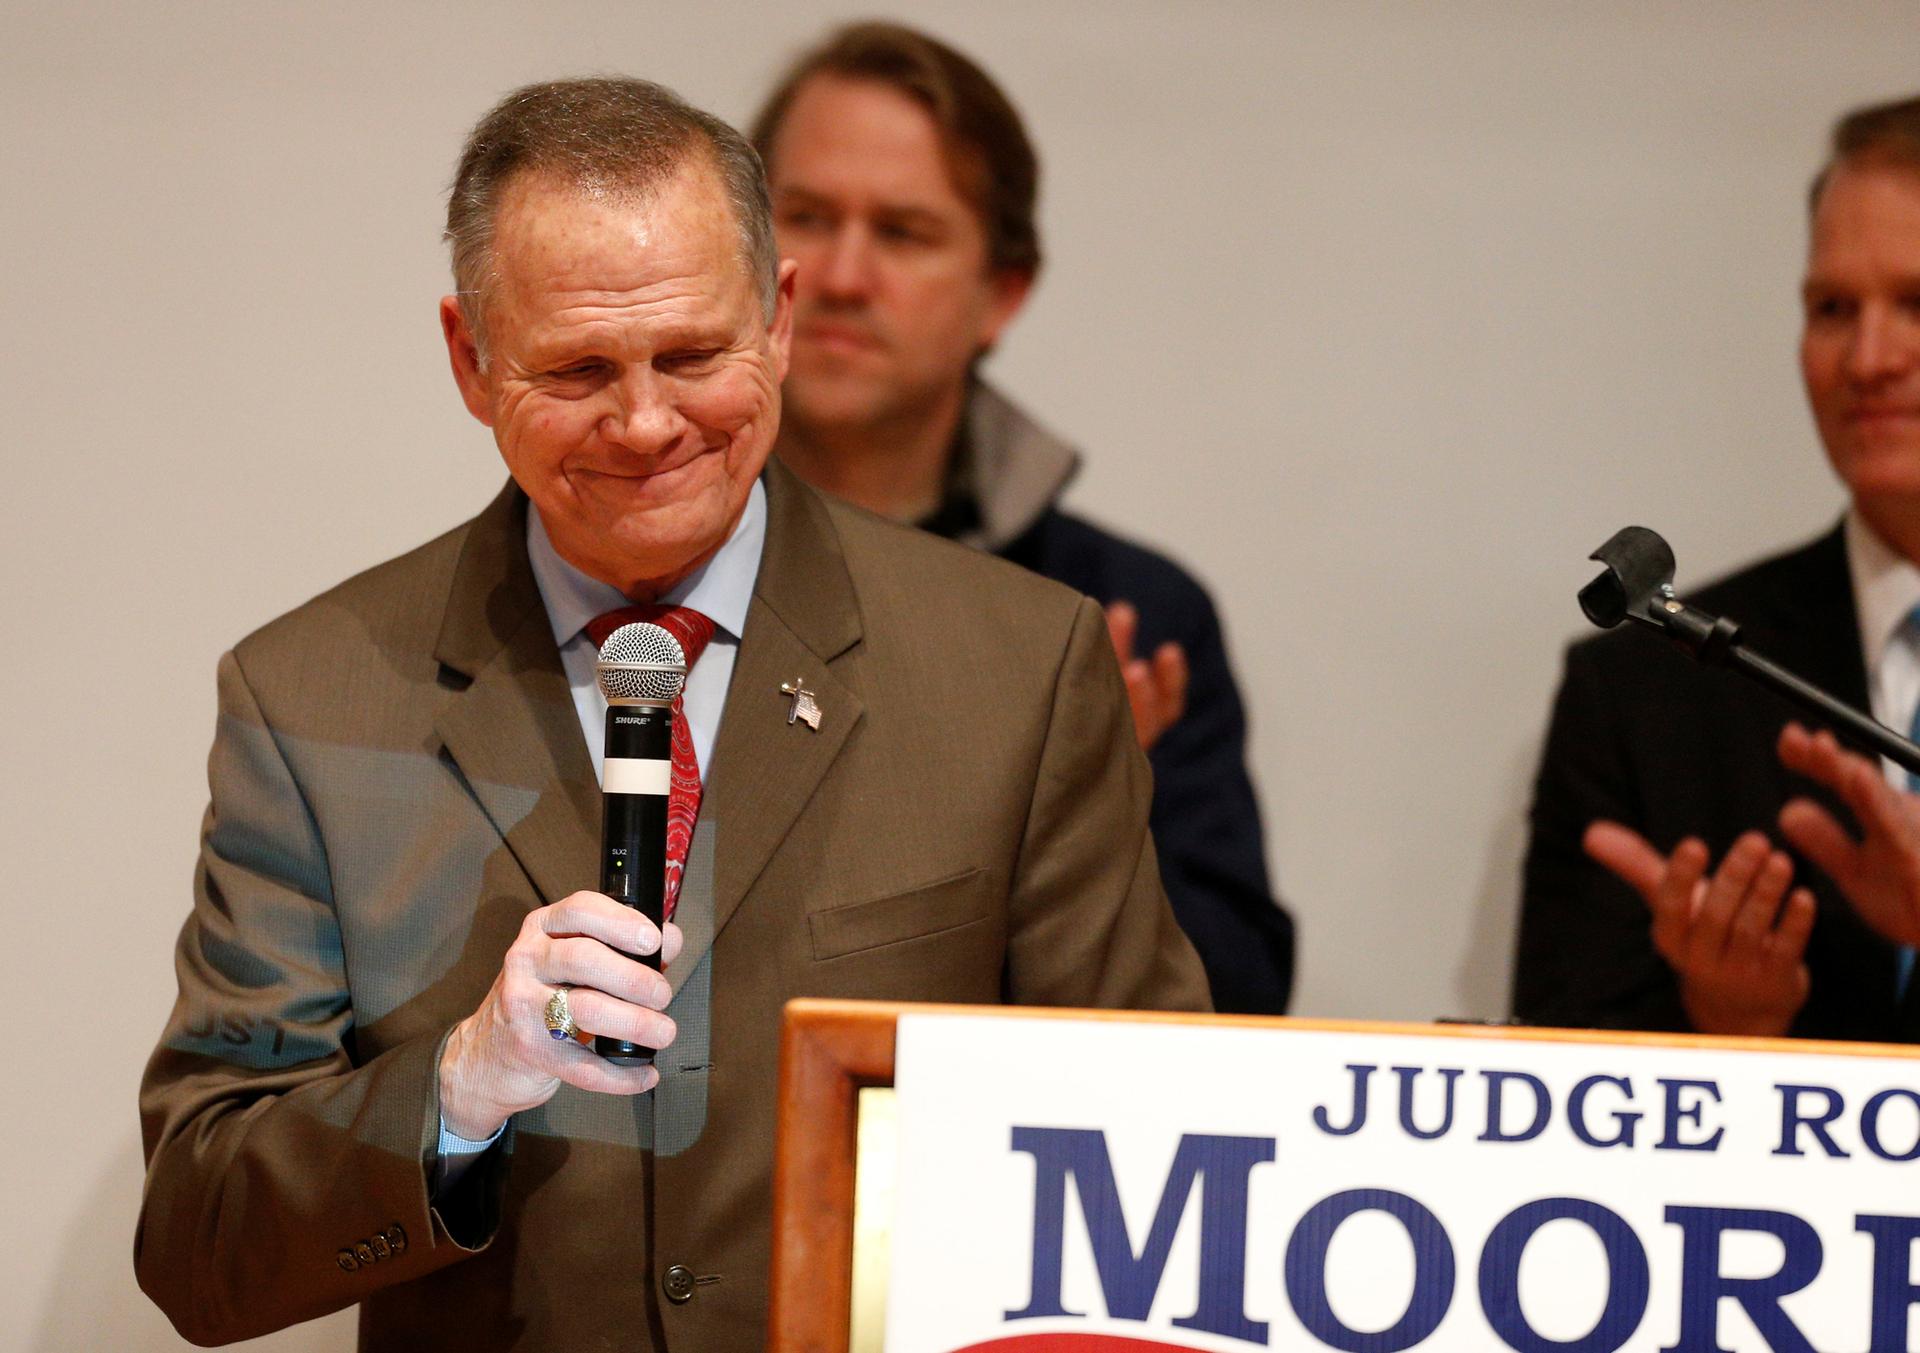 Republican US Senate candidate Roy Moore stands with microphone in hand behind a placard of his campaign poster.